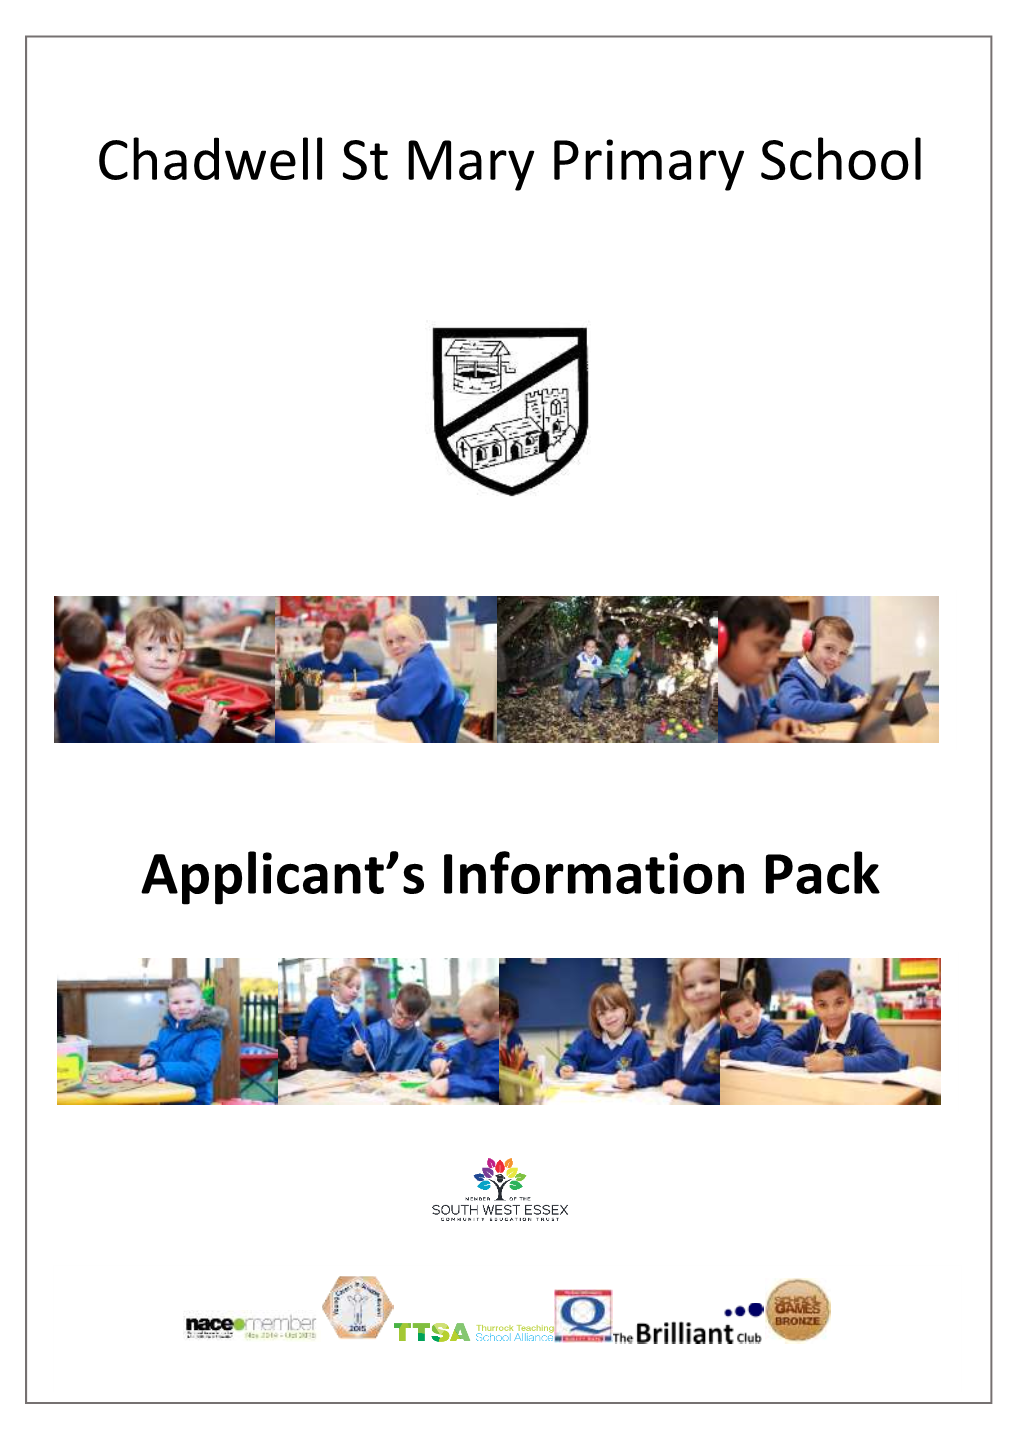 Chadwell St Mary Primary School Applicant's Information Pack